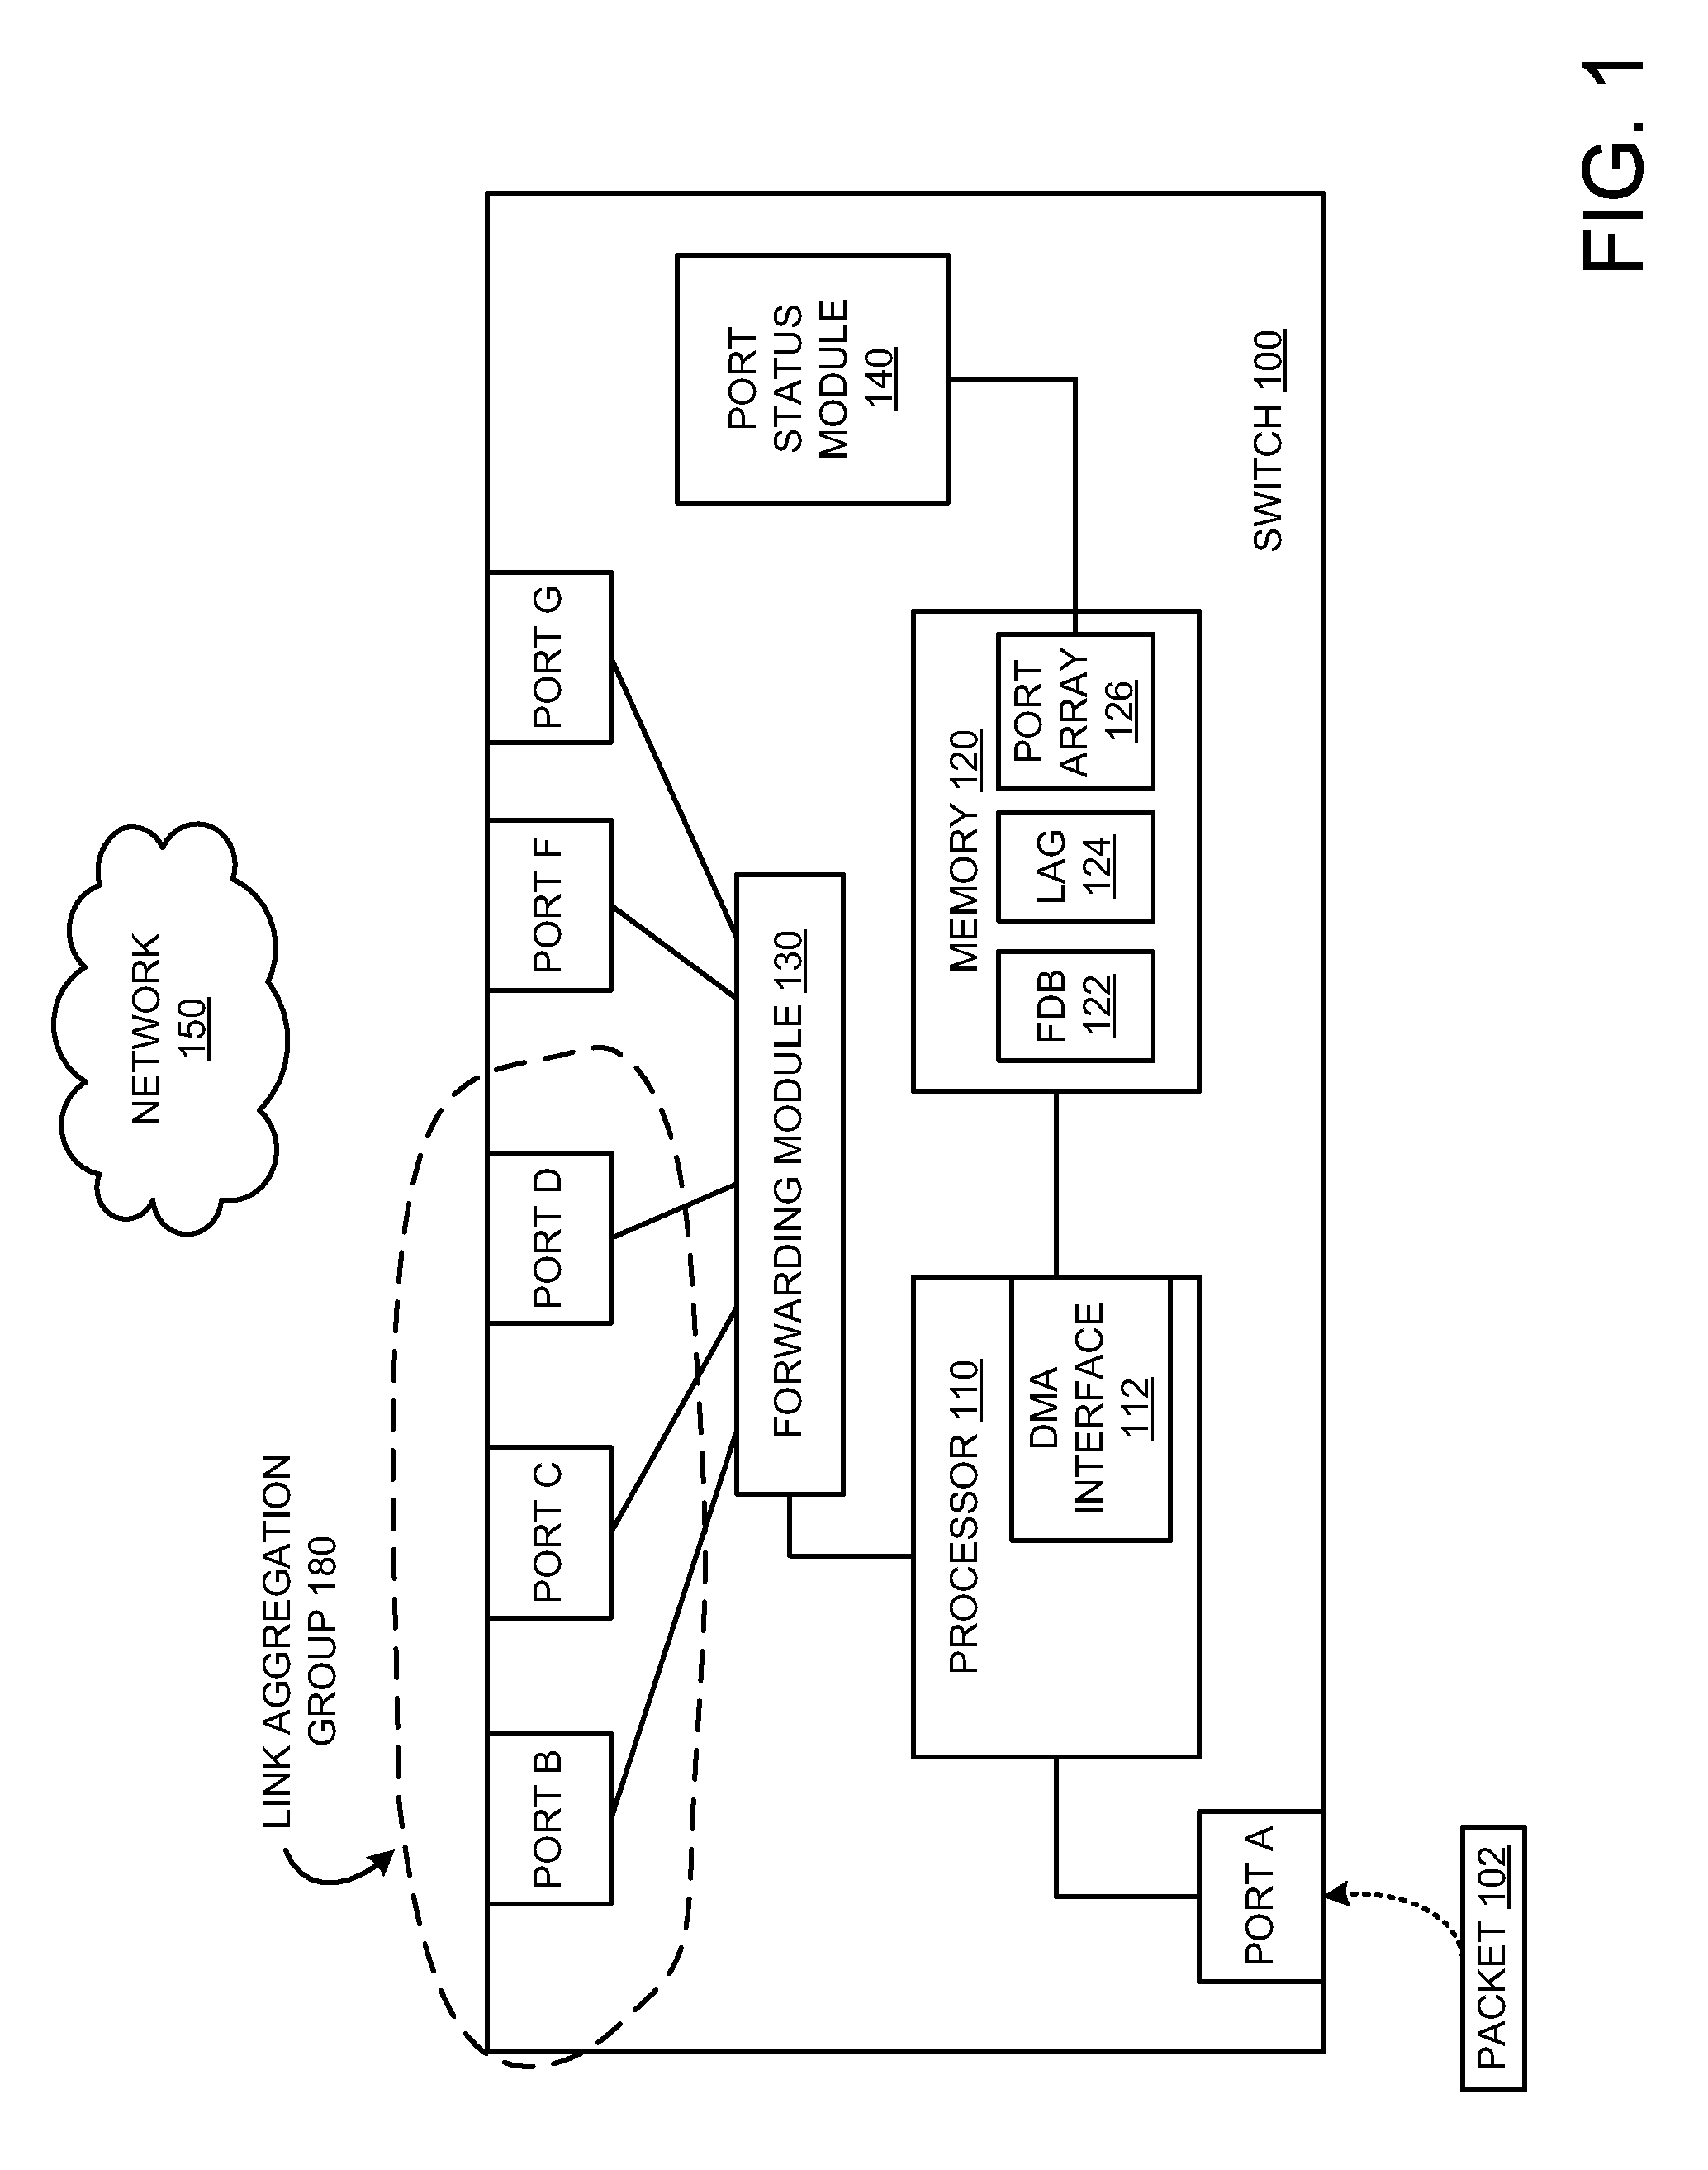 Traffic forwarding in a traffic-engineered link aggregation group